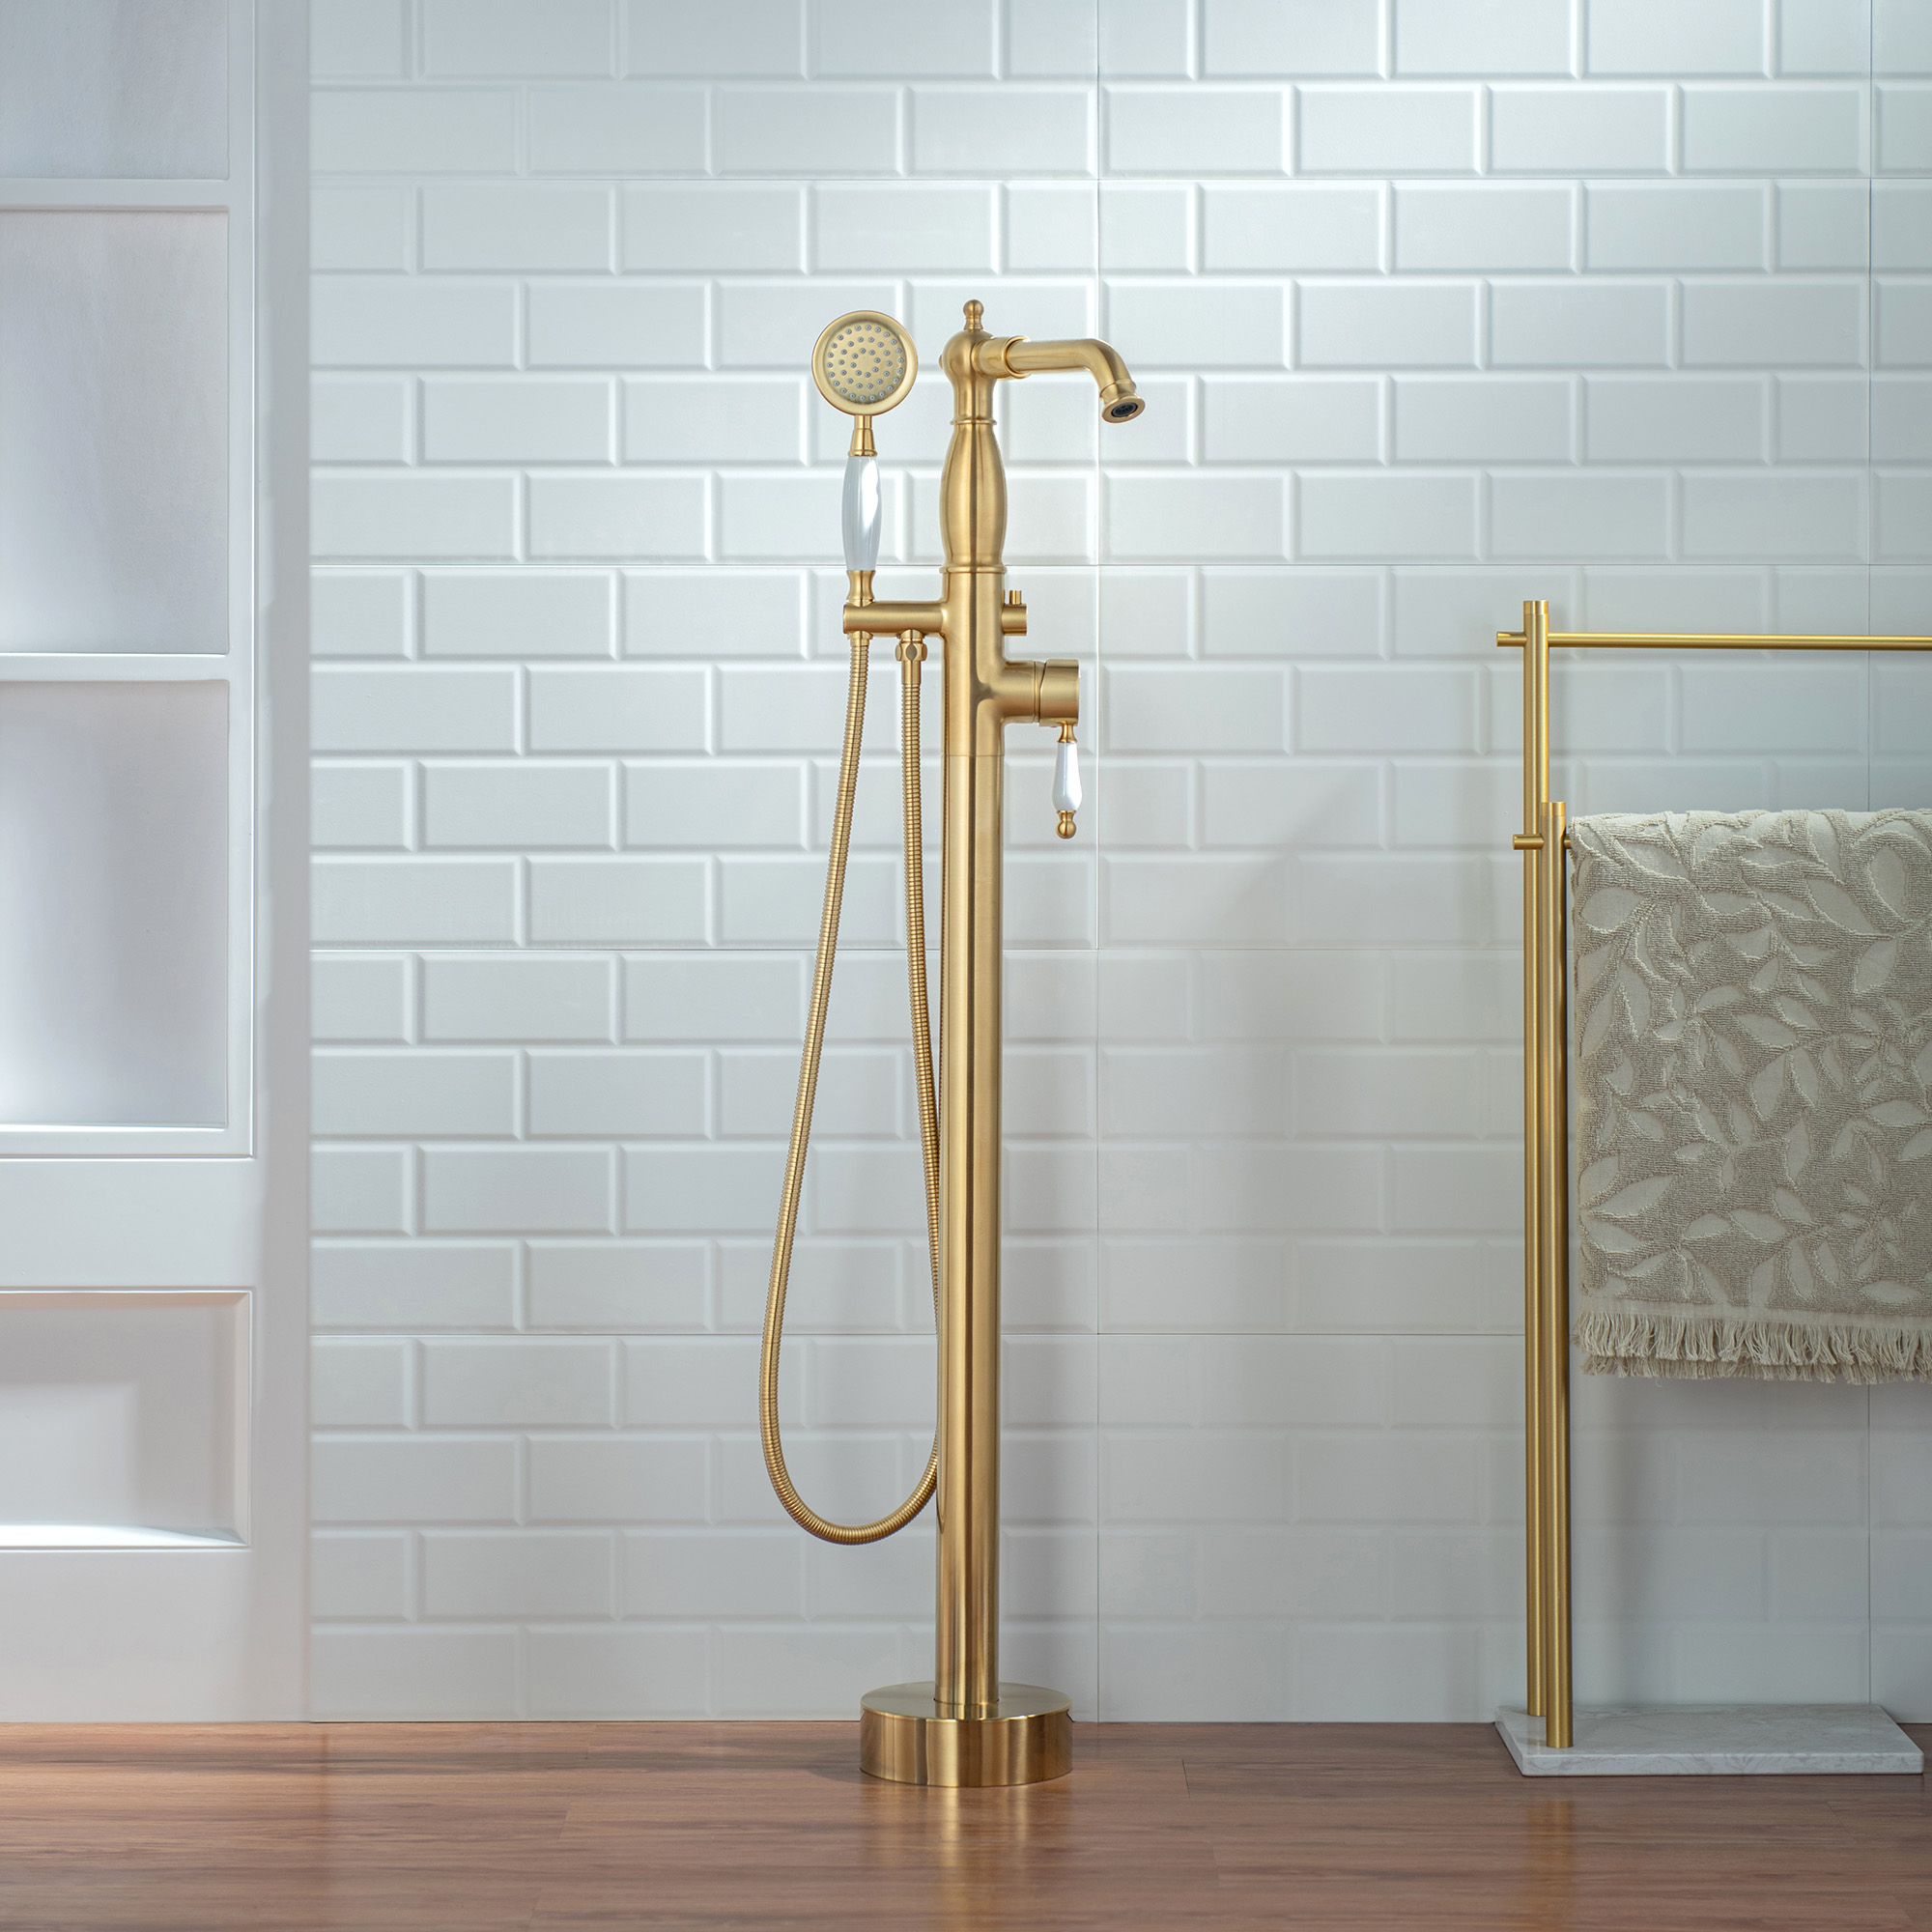  WOODBRIDGE F0050BG Fusion Single Handle Floor Mount Freestanding Tub Filler Faucet with Telephone Hand shower in Polished Gold Finis_12284